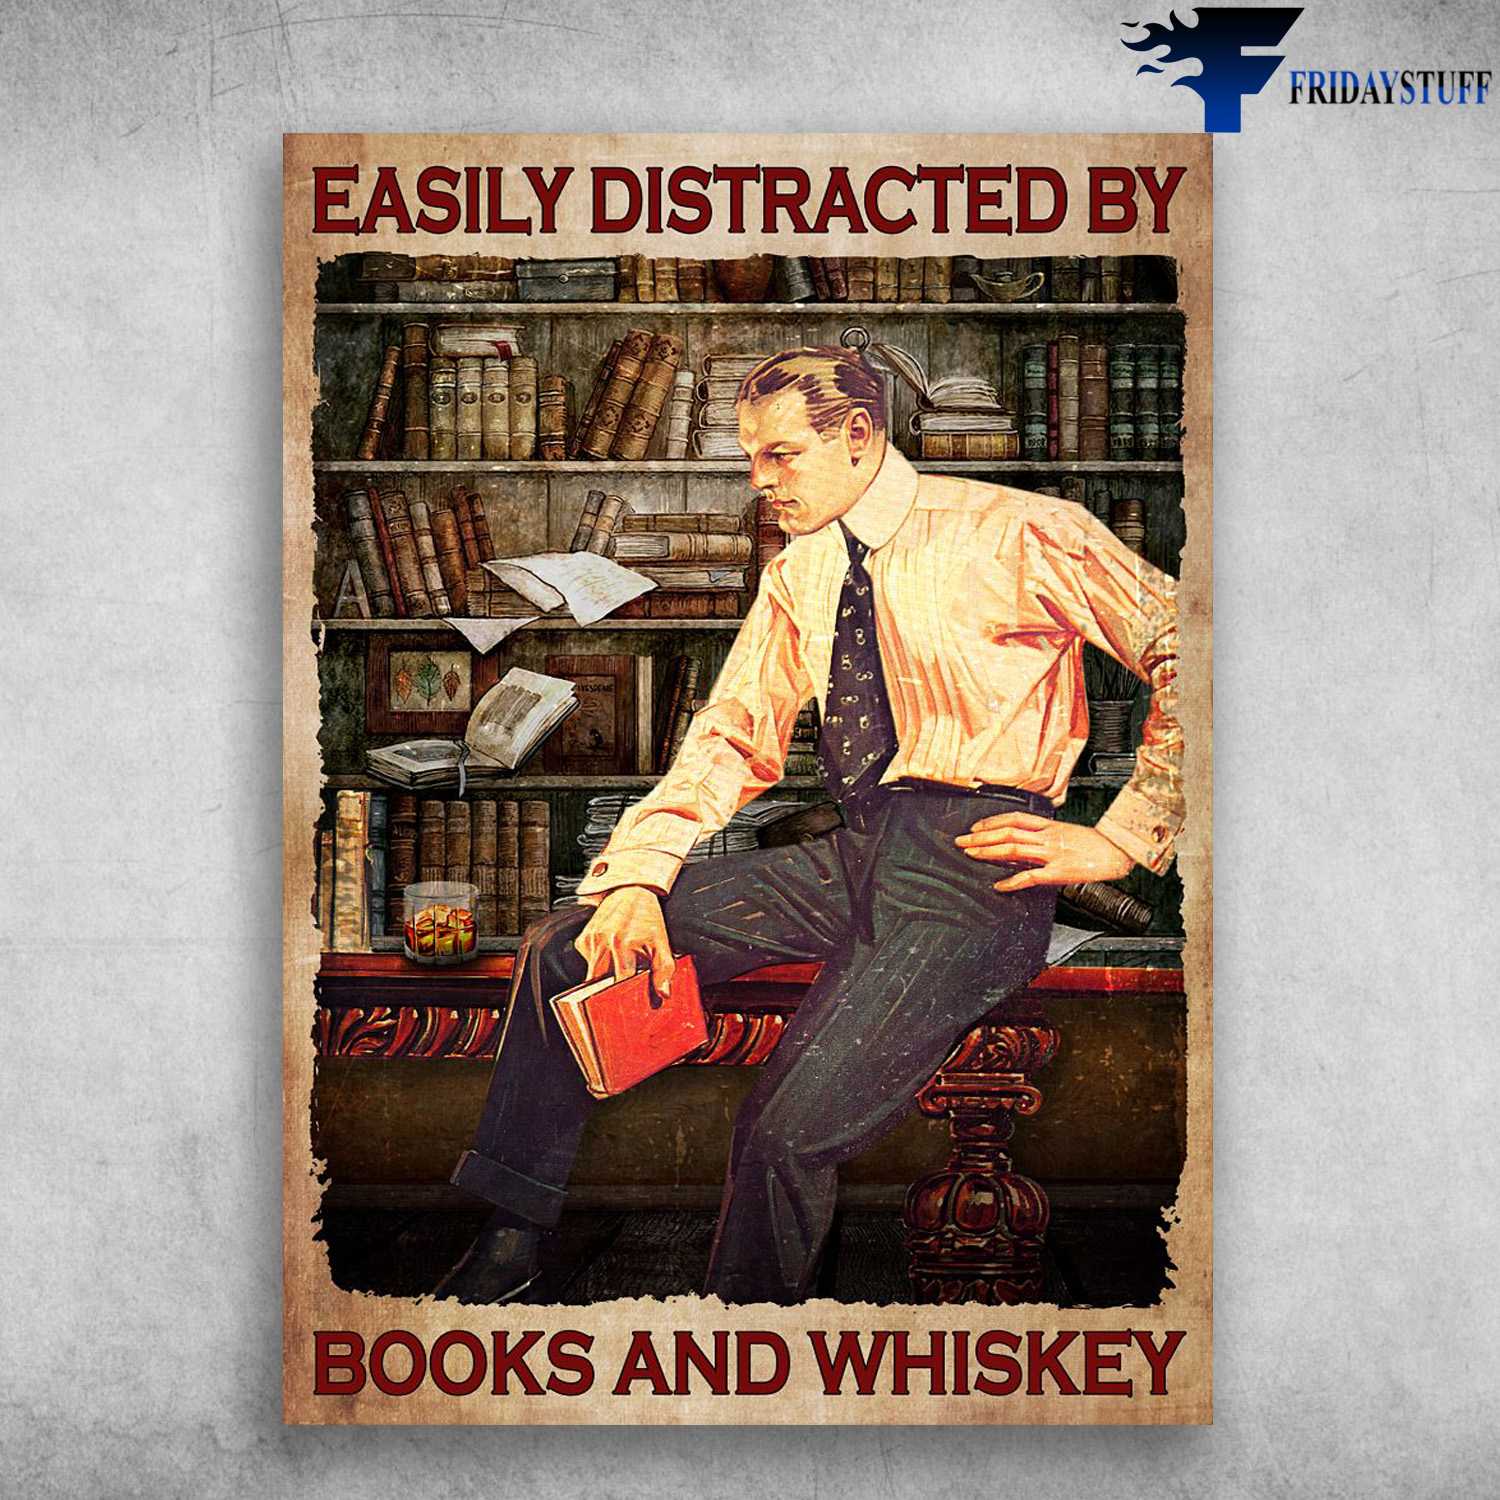 Man Reads Book, Drinking Wine - Easily Distracted By, Books And Whiskey